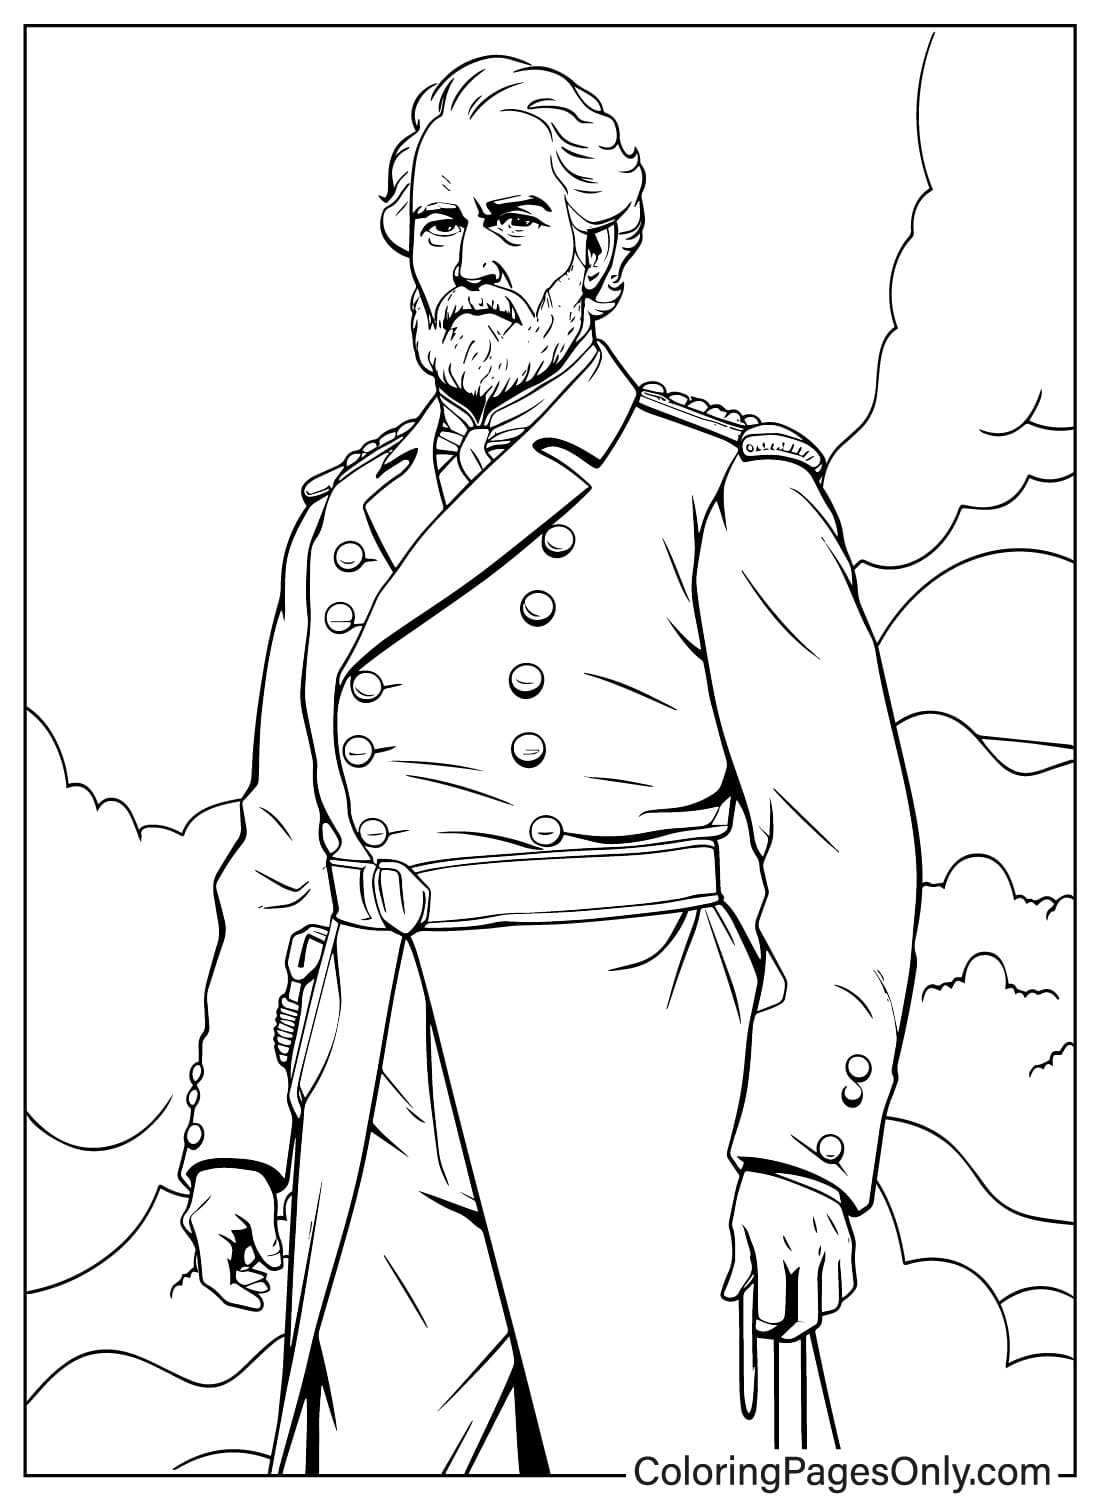 Printable Robert E. Lee Coloring Page from